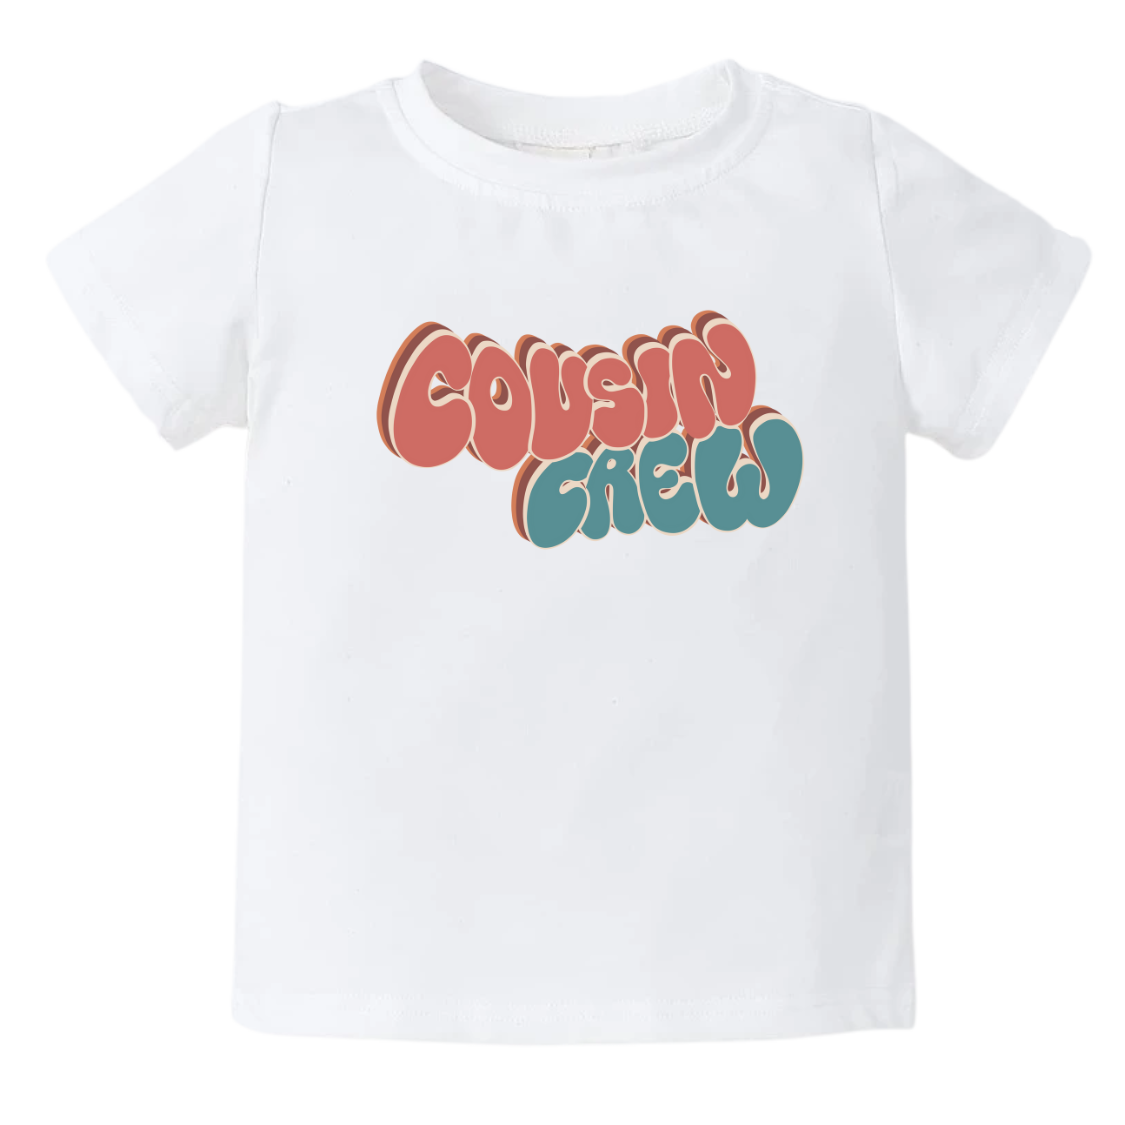 White Kid Tshirt with a groovy printed graphic and the text 'Cousin Crew.' This trendy and cool design celebrates the bond of cousins in a unique and stylish way. 